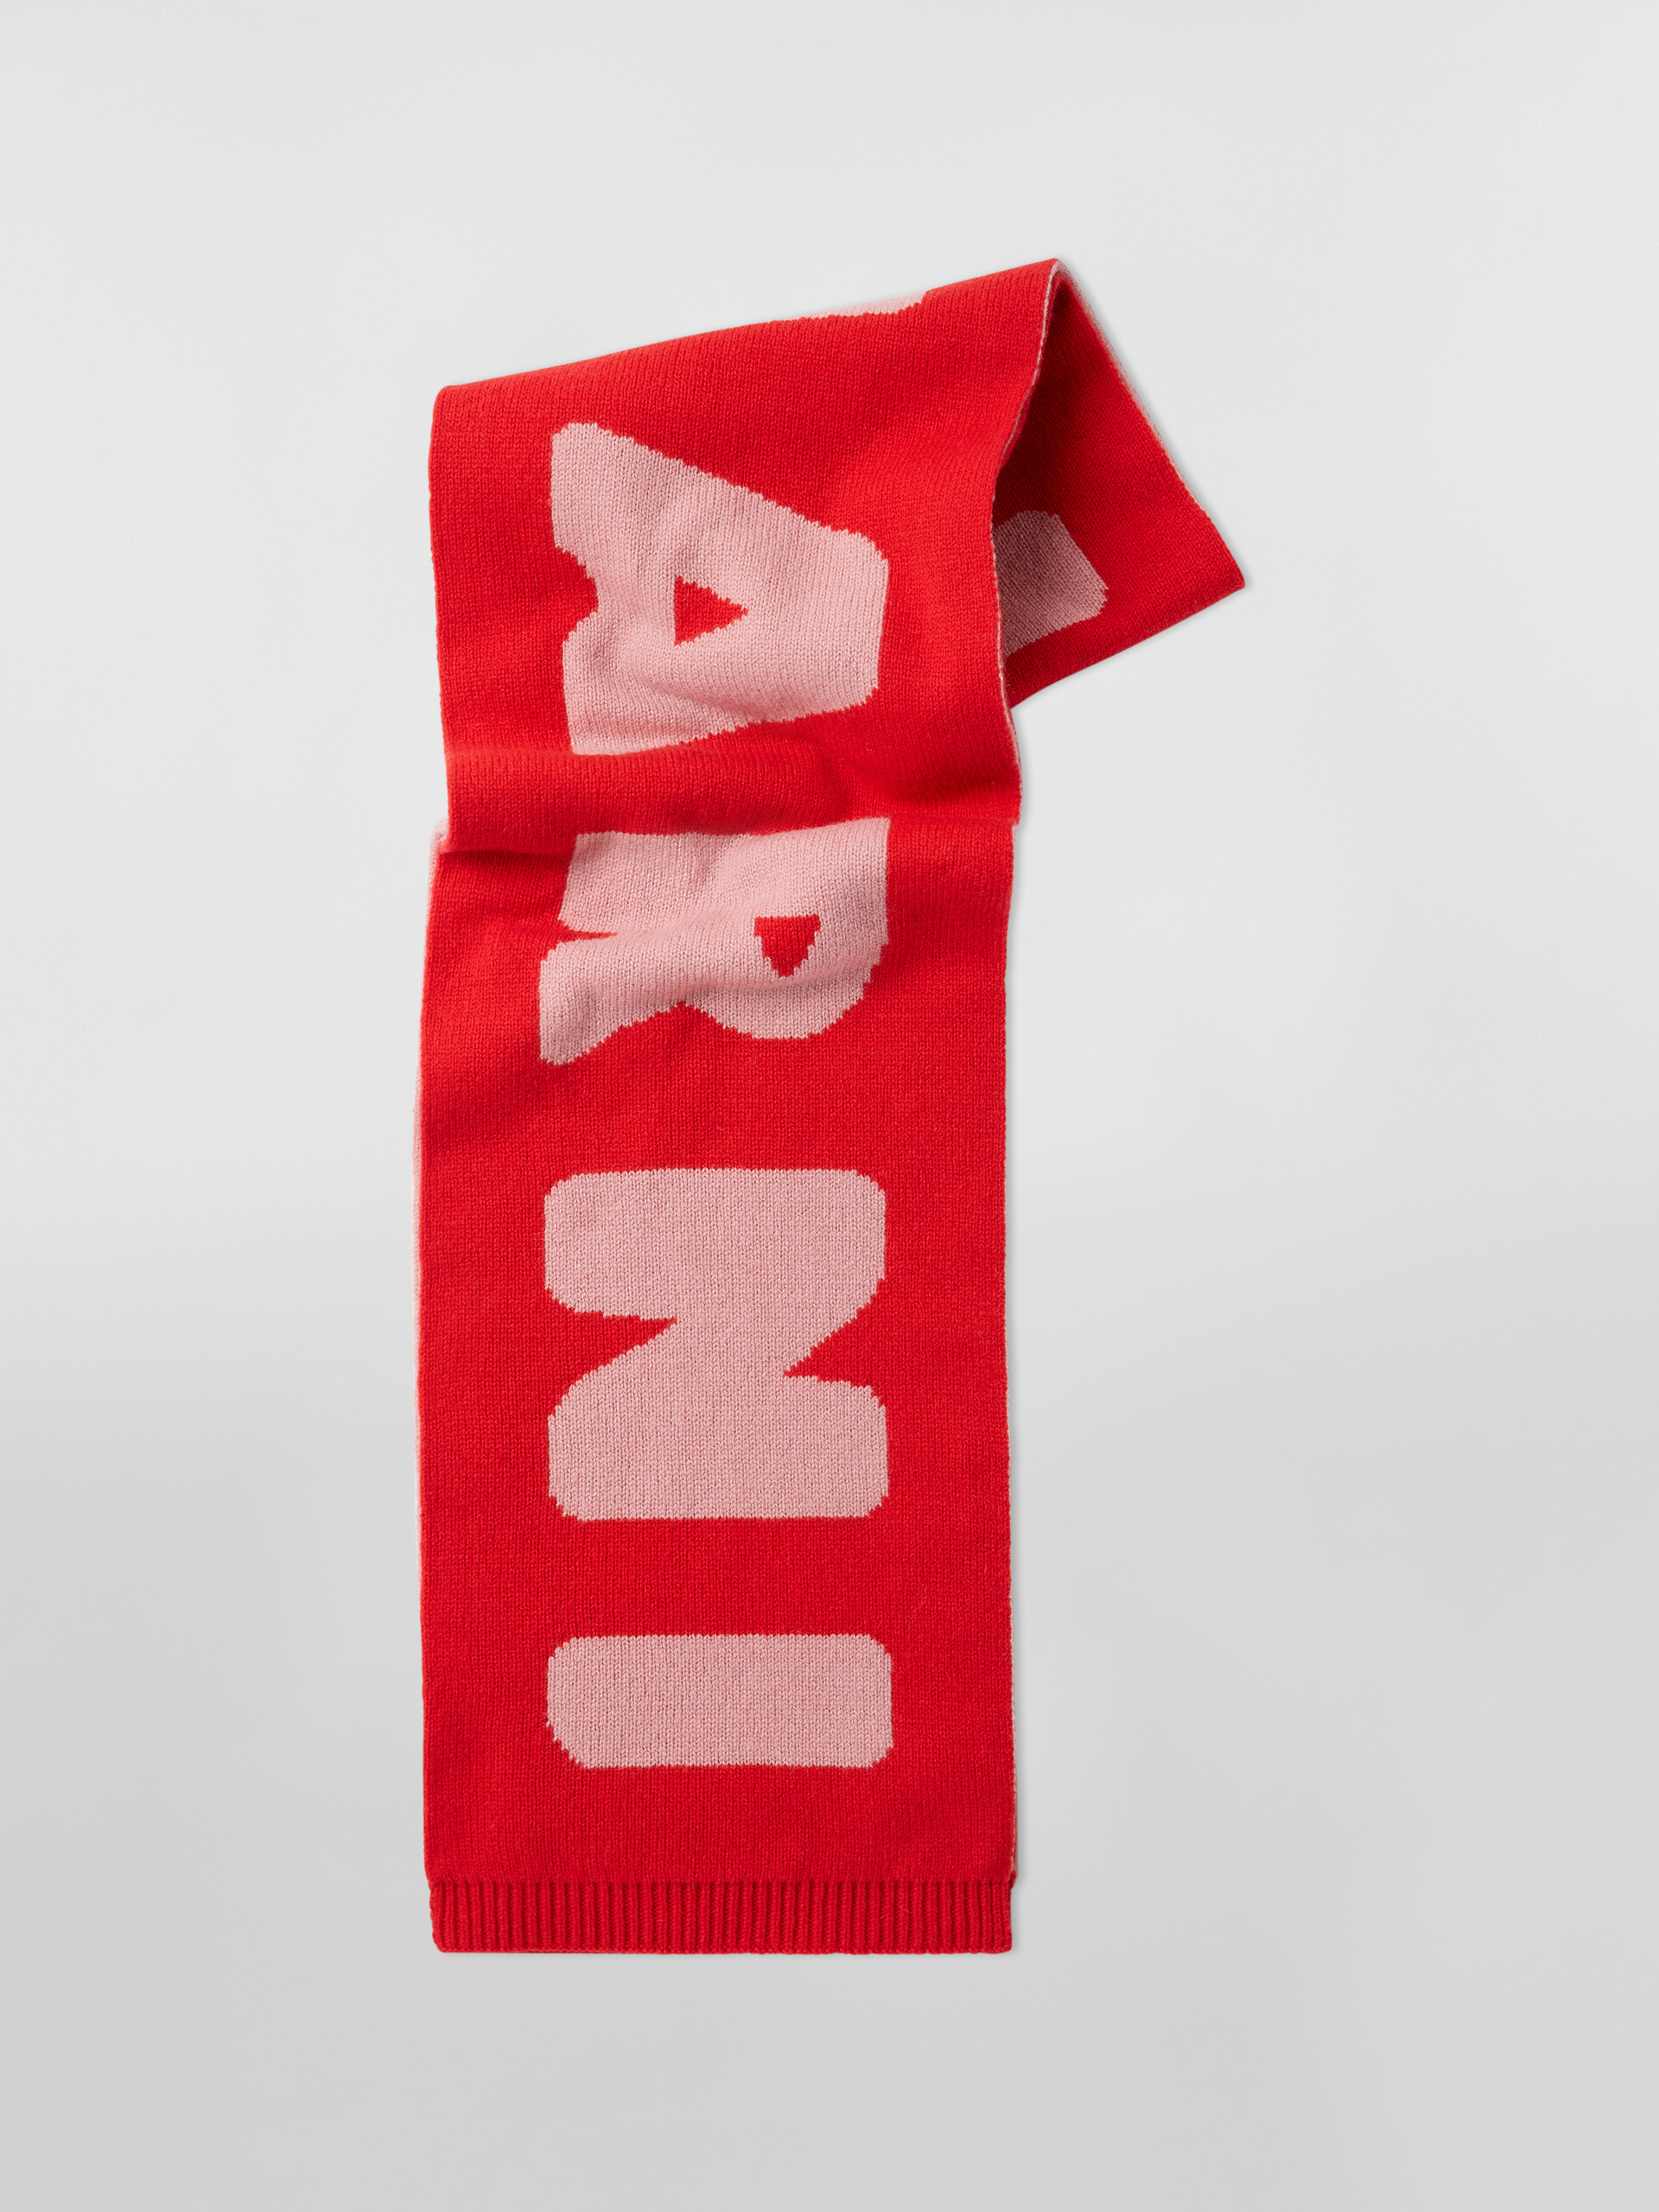 WOOL SCARF WITH MAXI LOGO - Scarves - Image 1